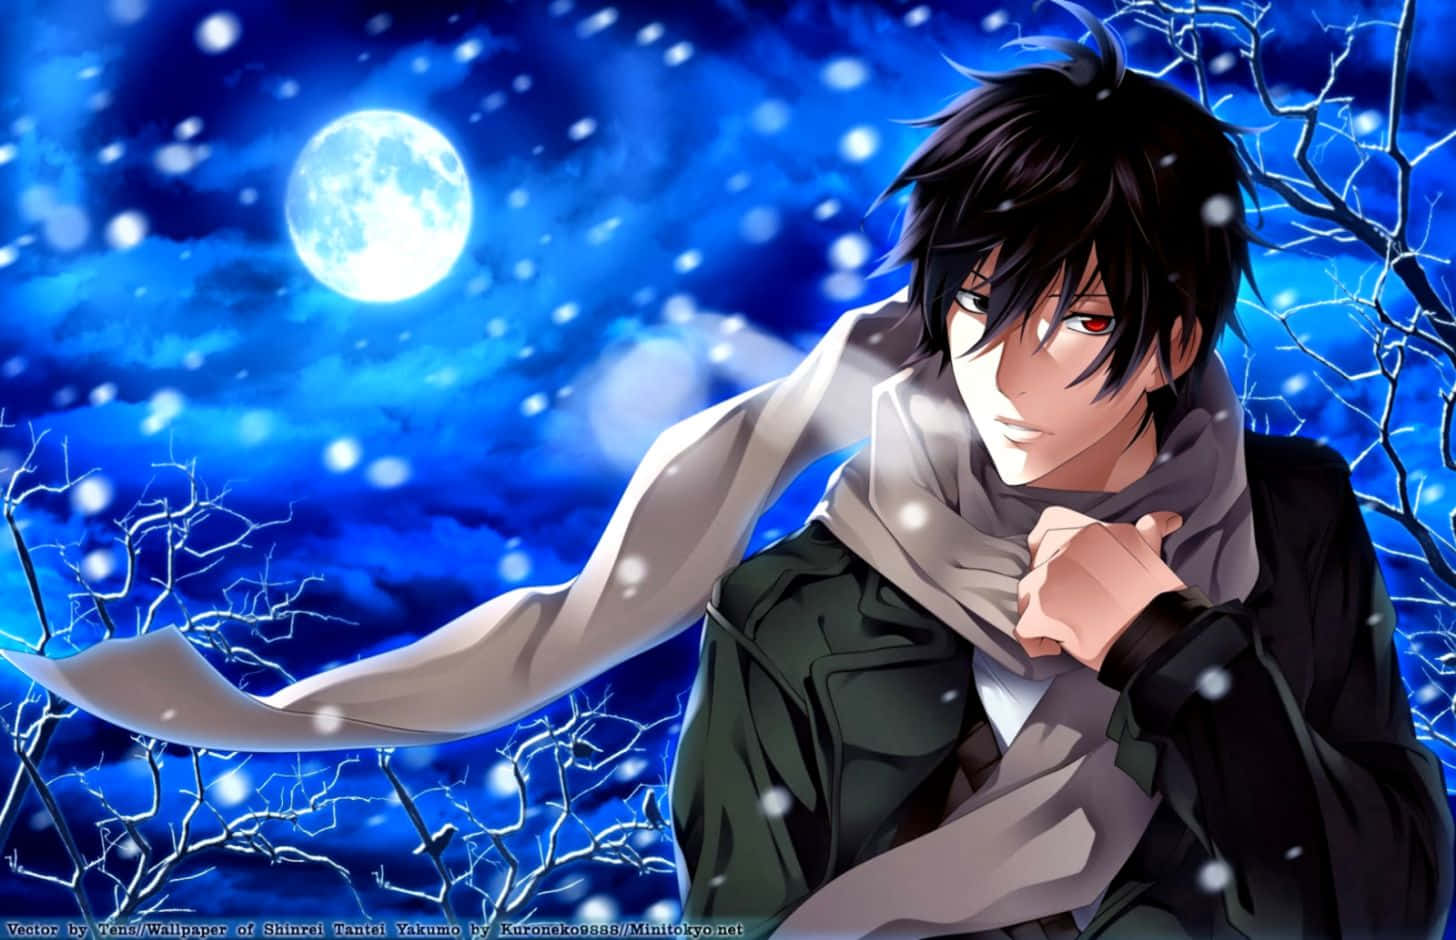 Anime Boy wallpaper by ComicWallpapers  Download on ZEDGE  64e4